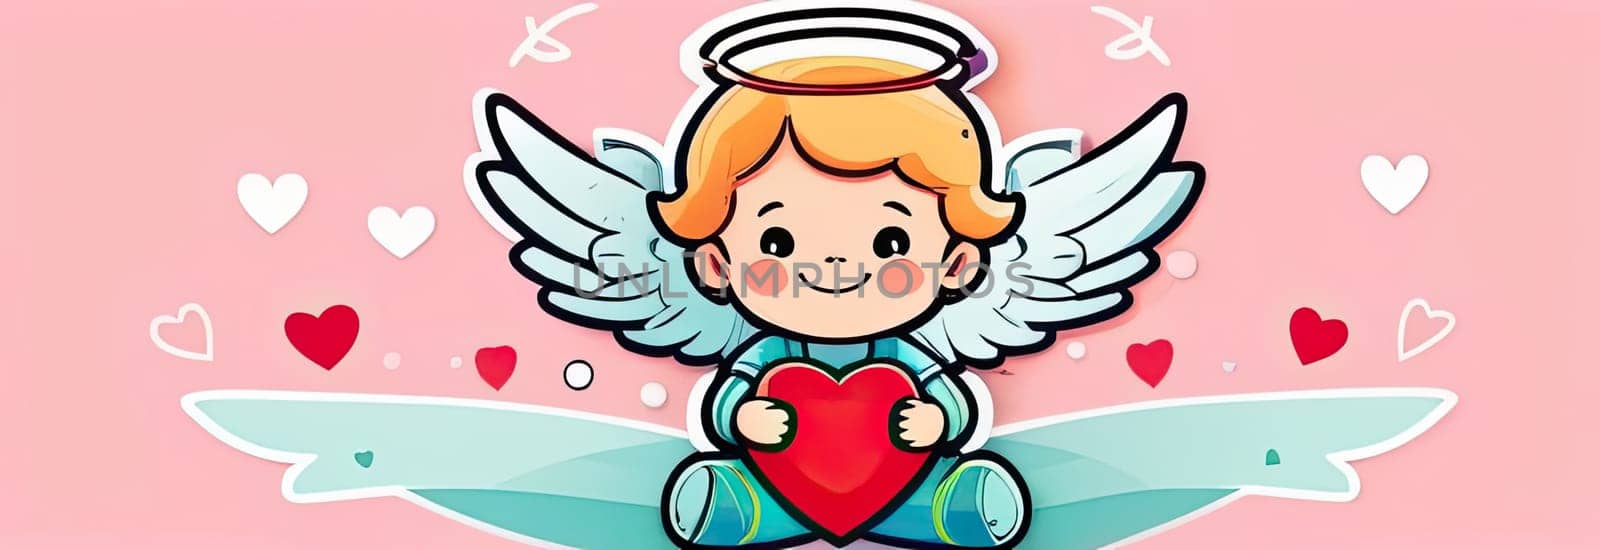 Illustration of greeting card white, cute, funny baby cupid angel with gold curly hair on pastel colors background. Promotion, shopping template for love and valentines, mothers day concept. Flat lay